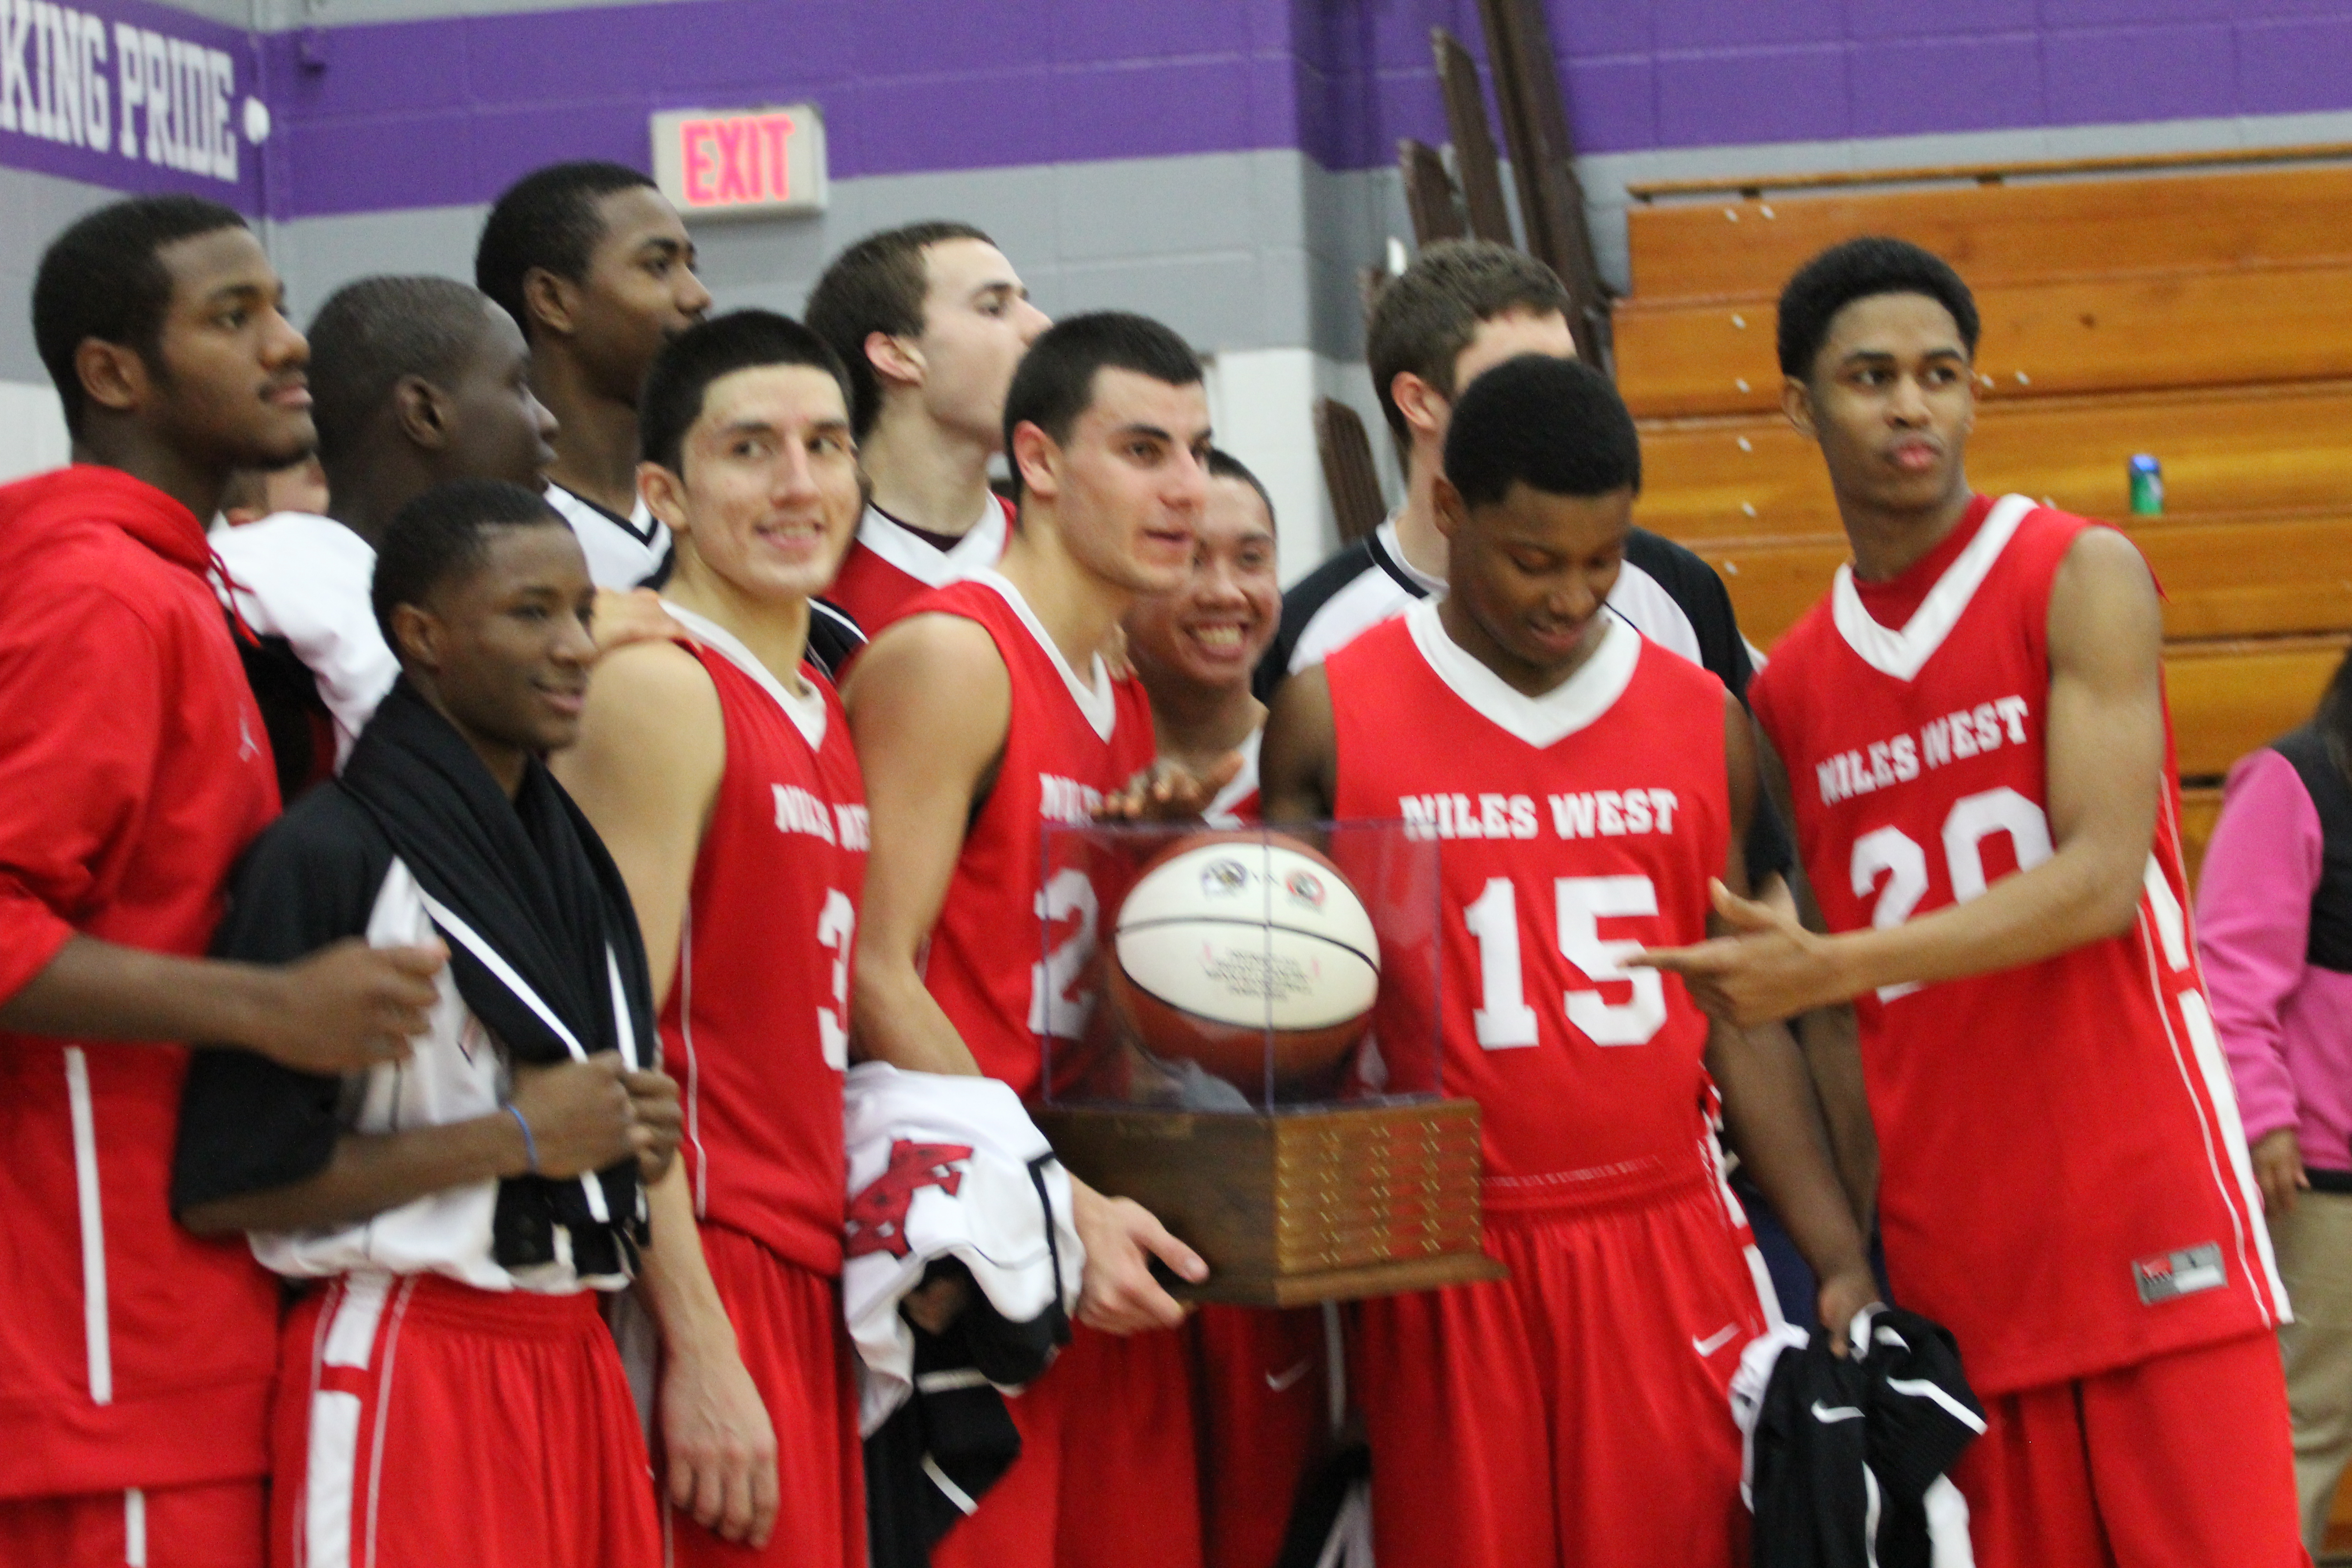 Niles West Basketball Stats